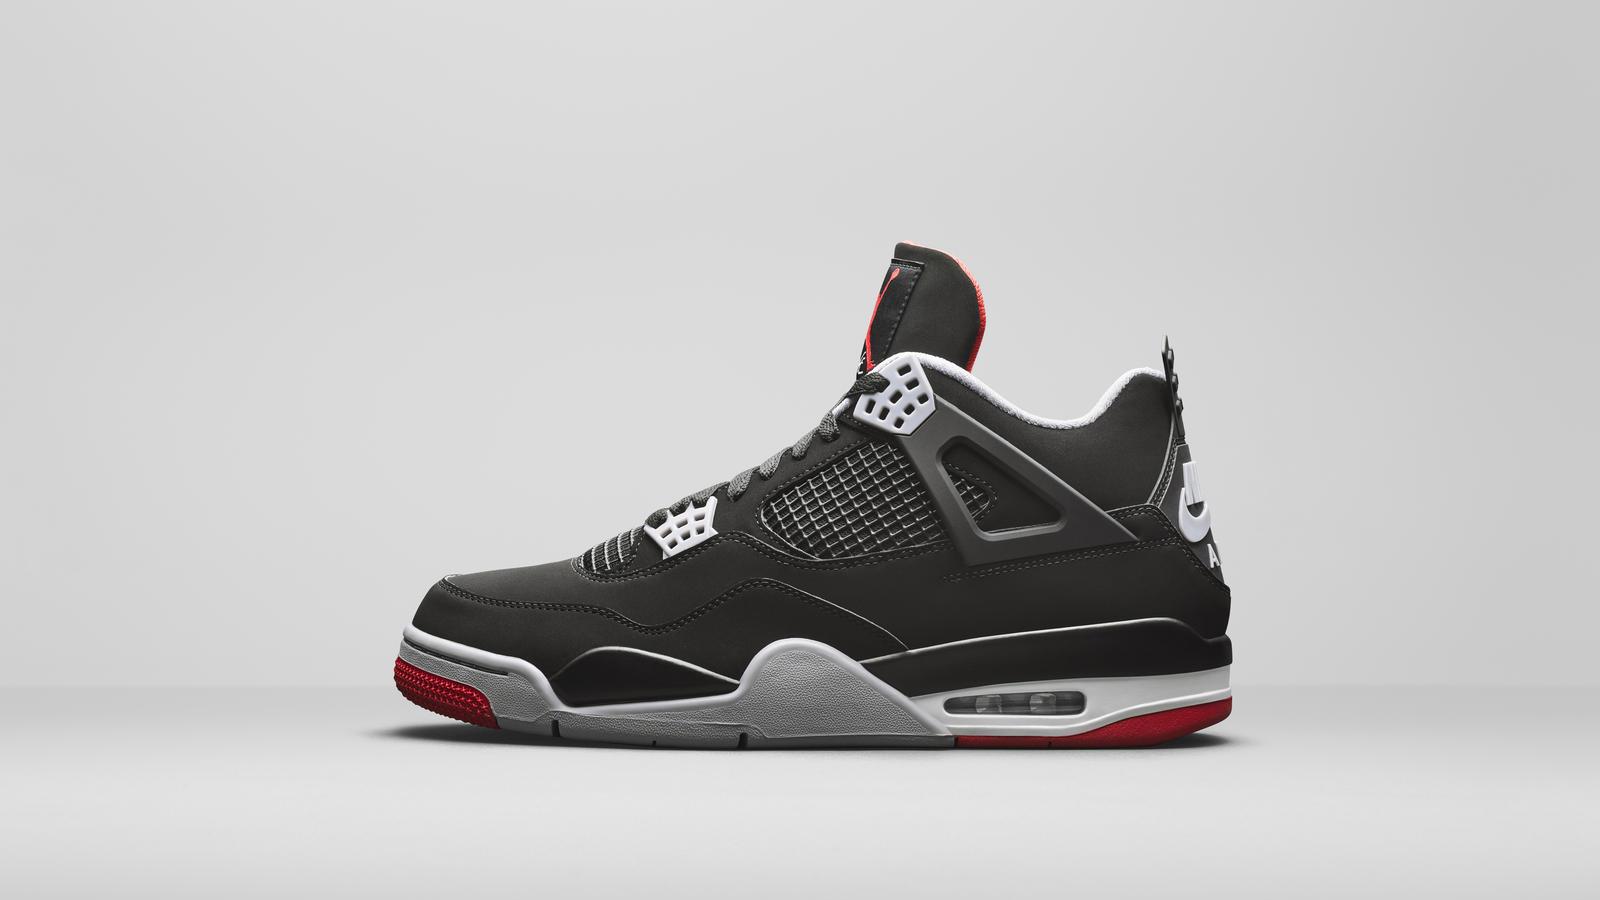 Air Jordan 4 Bred Official Image and Release Date